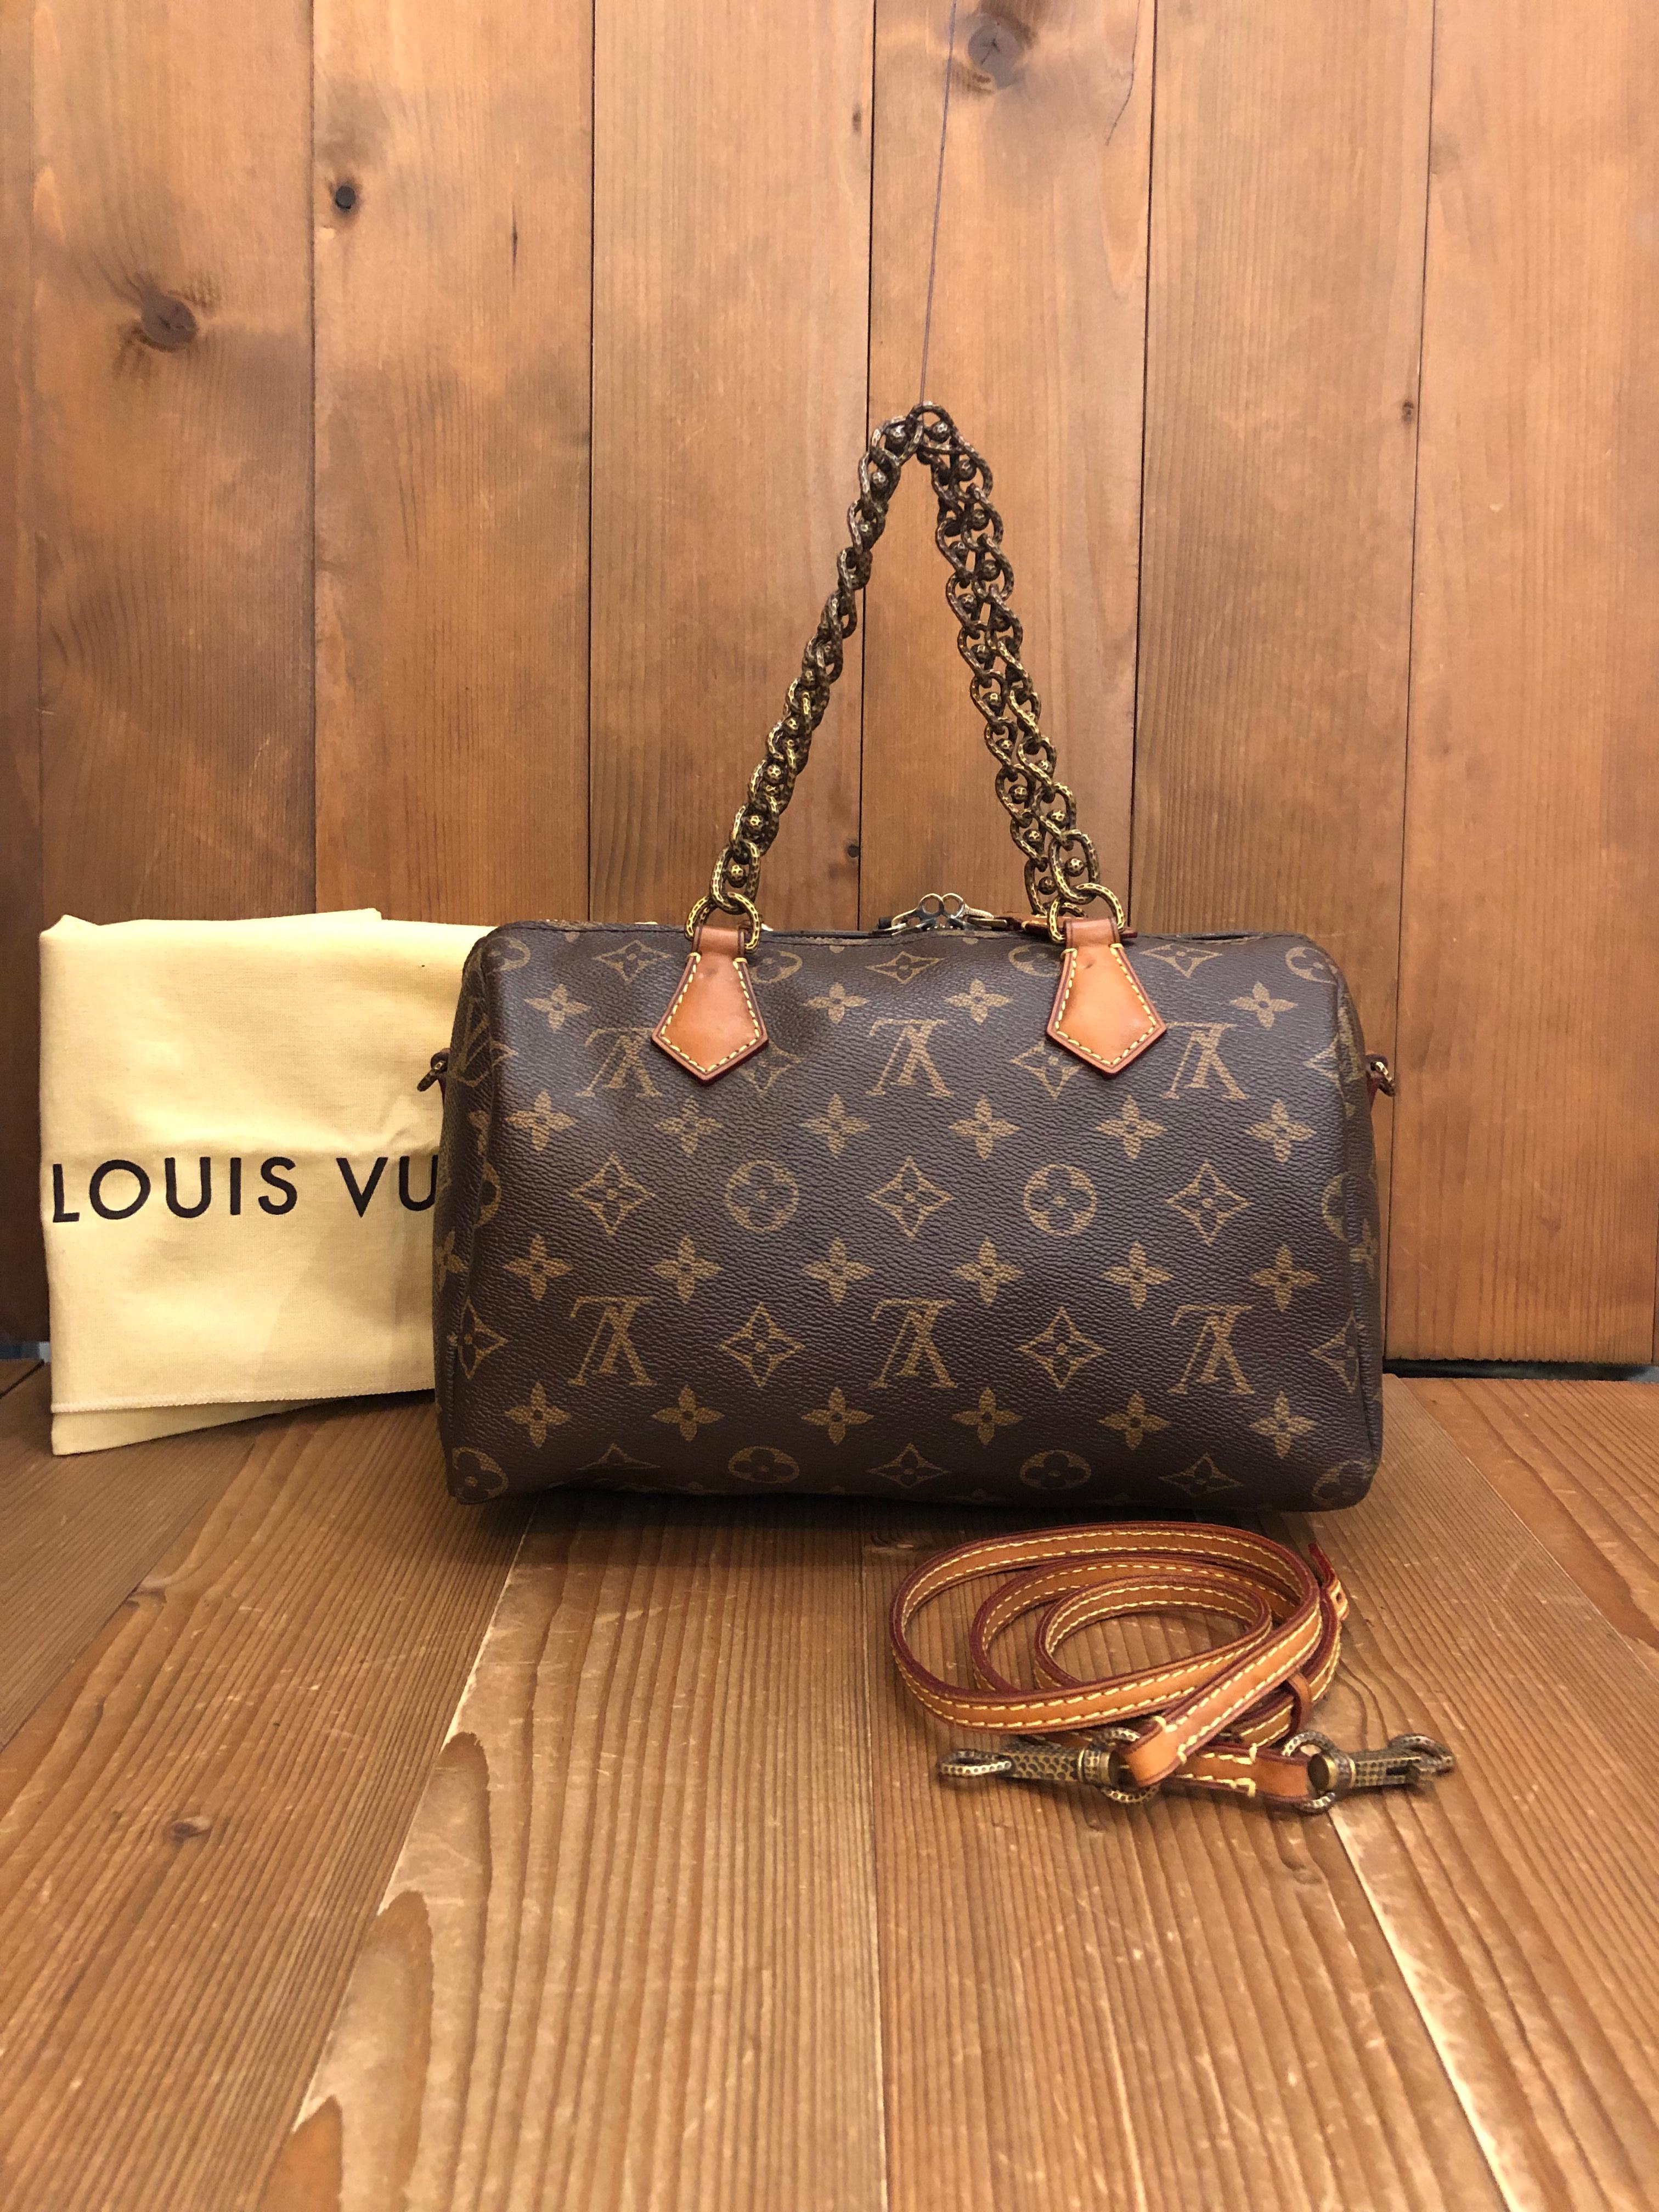 For Fall/Winter 2013-2014, Louis Vuitton focused on using dramatic materials and reimaging shapes. The classic Louis Vuitton Speedy has been updated with hammered beaded chain handles. Made in Spain in 2013 with date-code CA2153. Measures